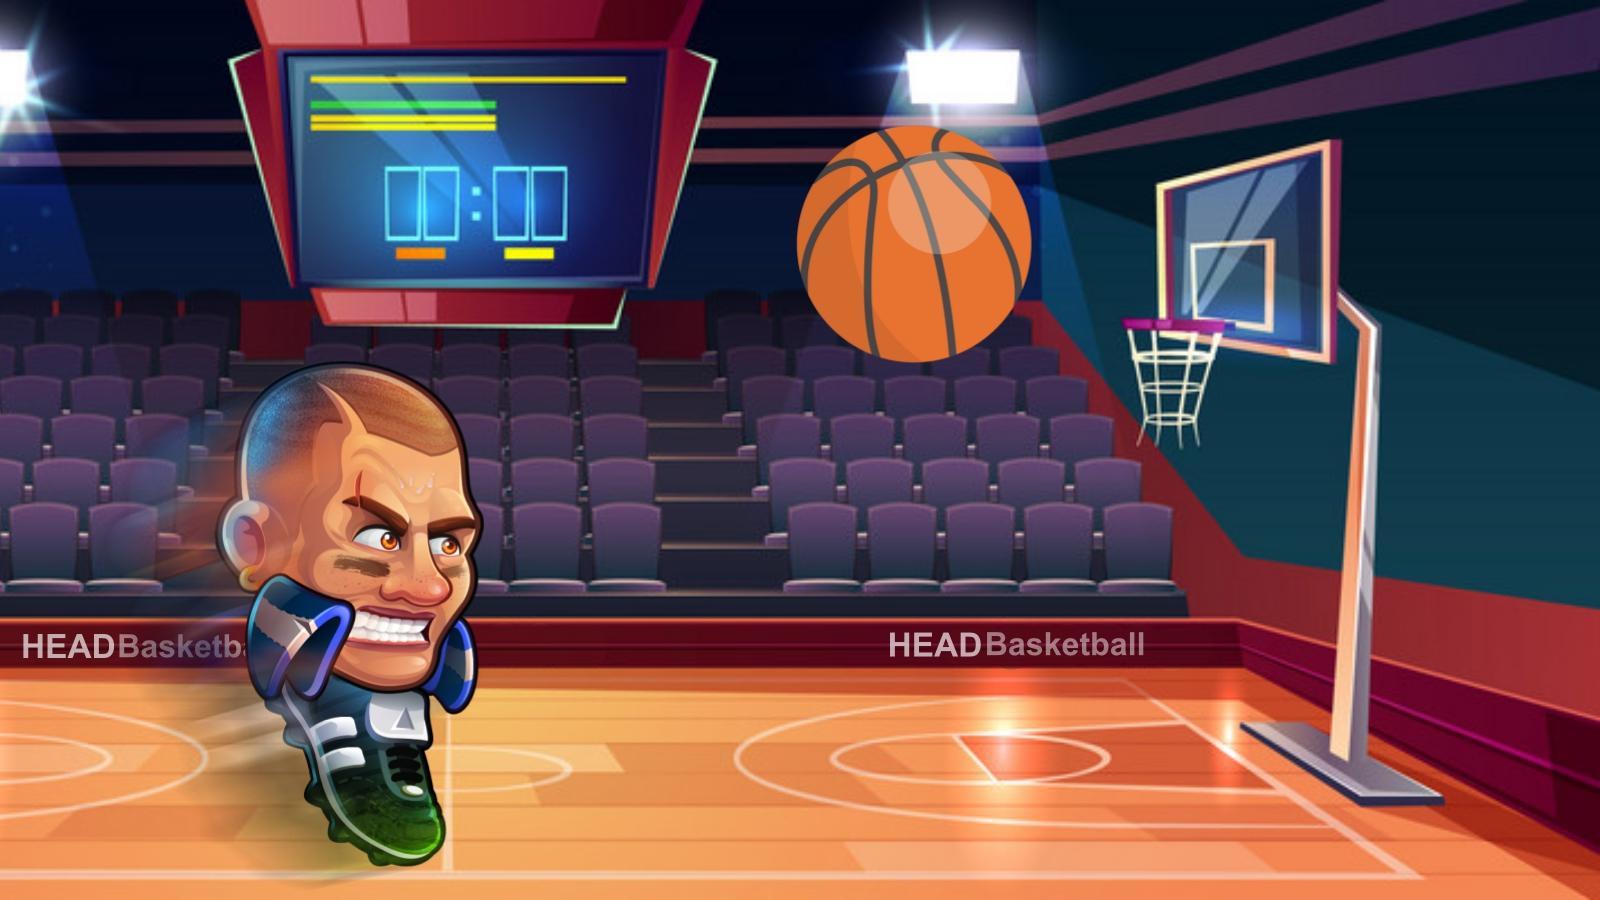 Head Basketball for Android - APK Download